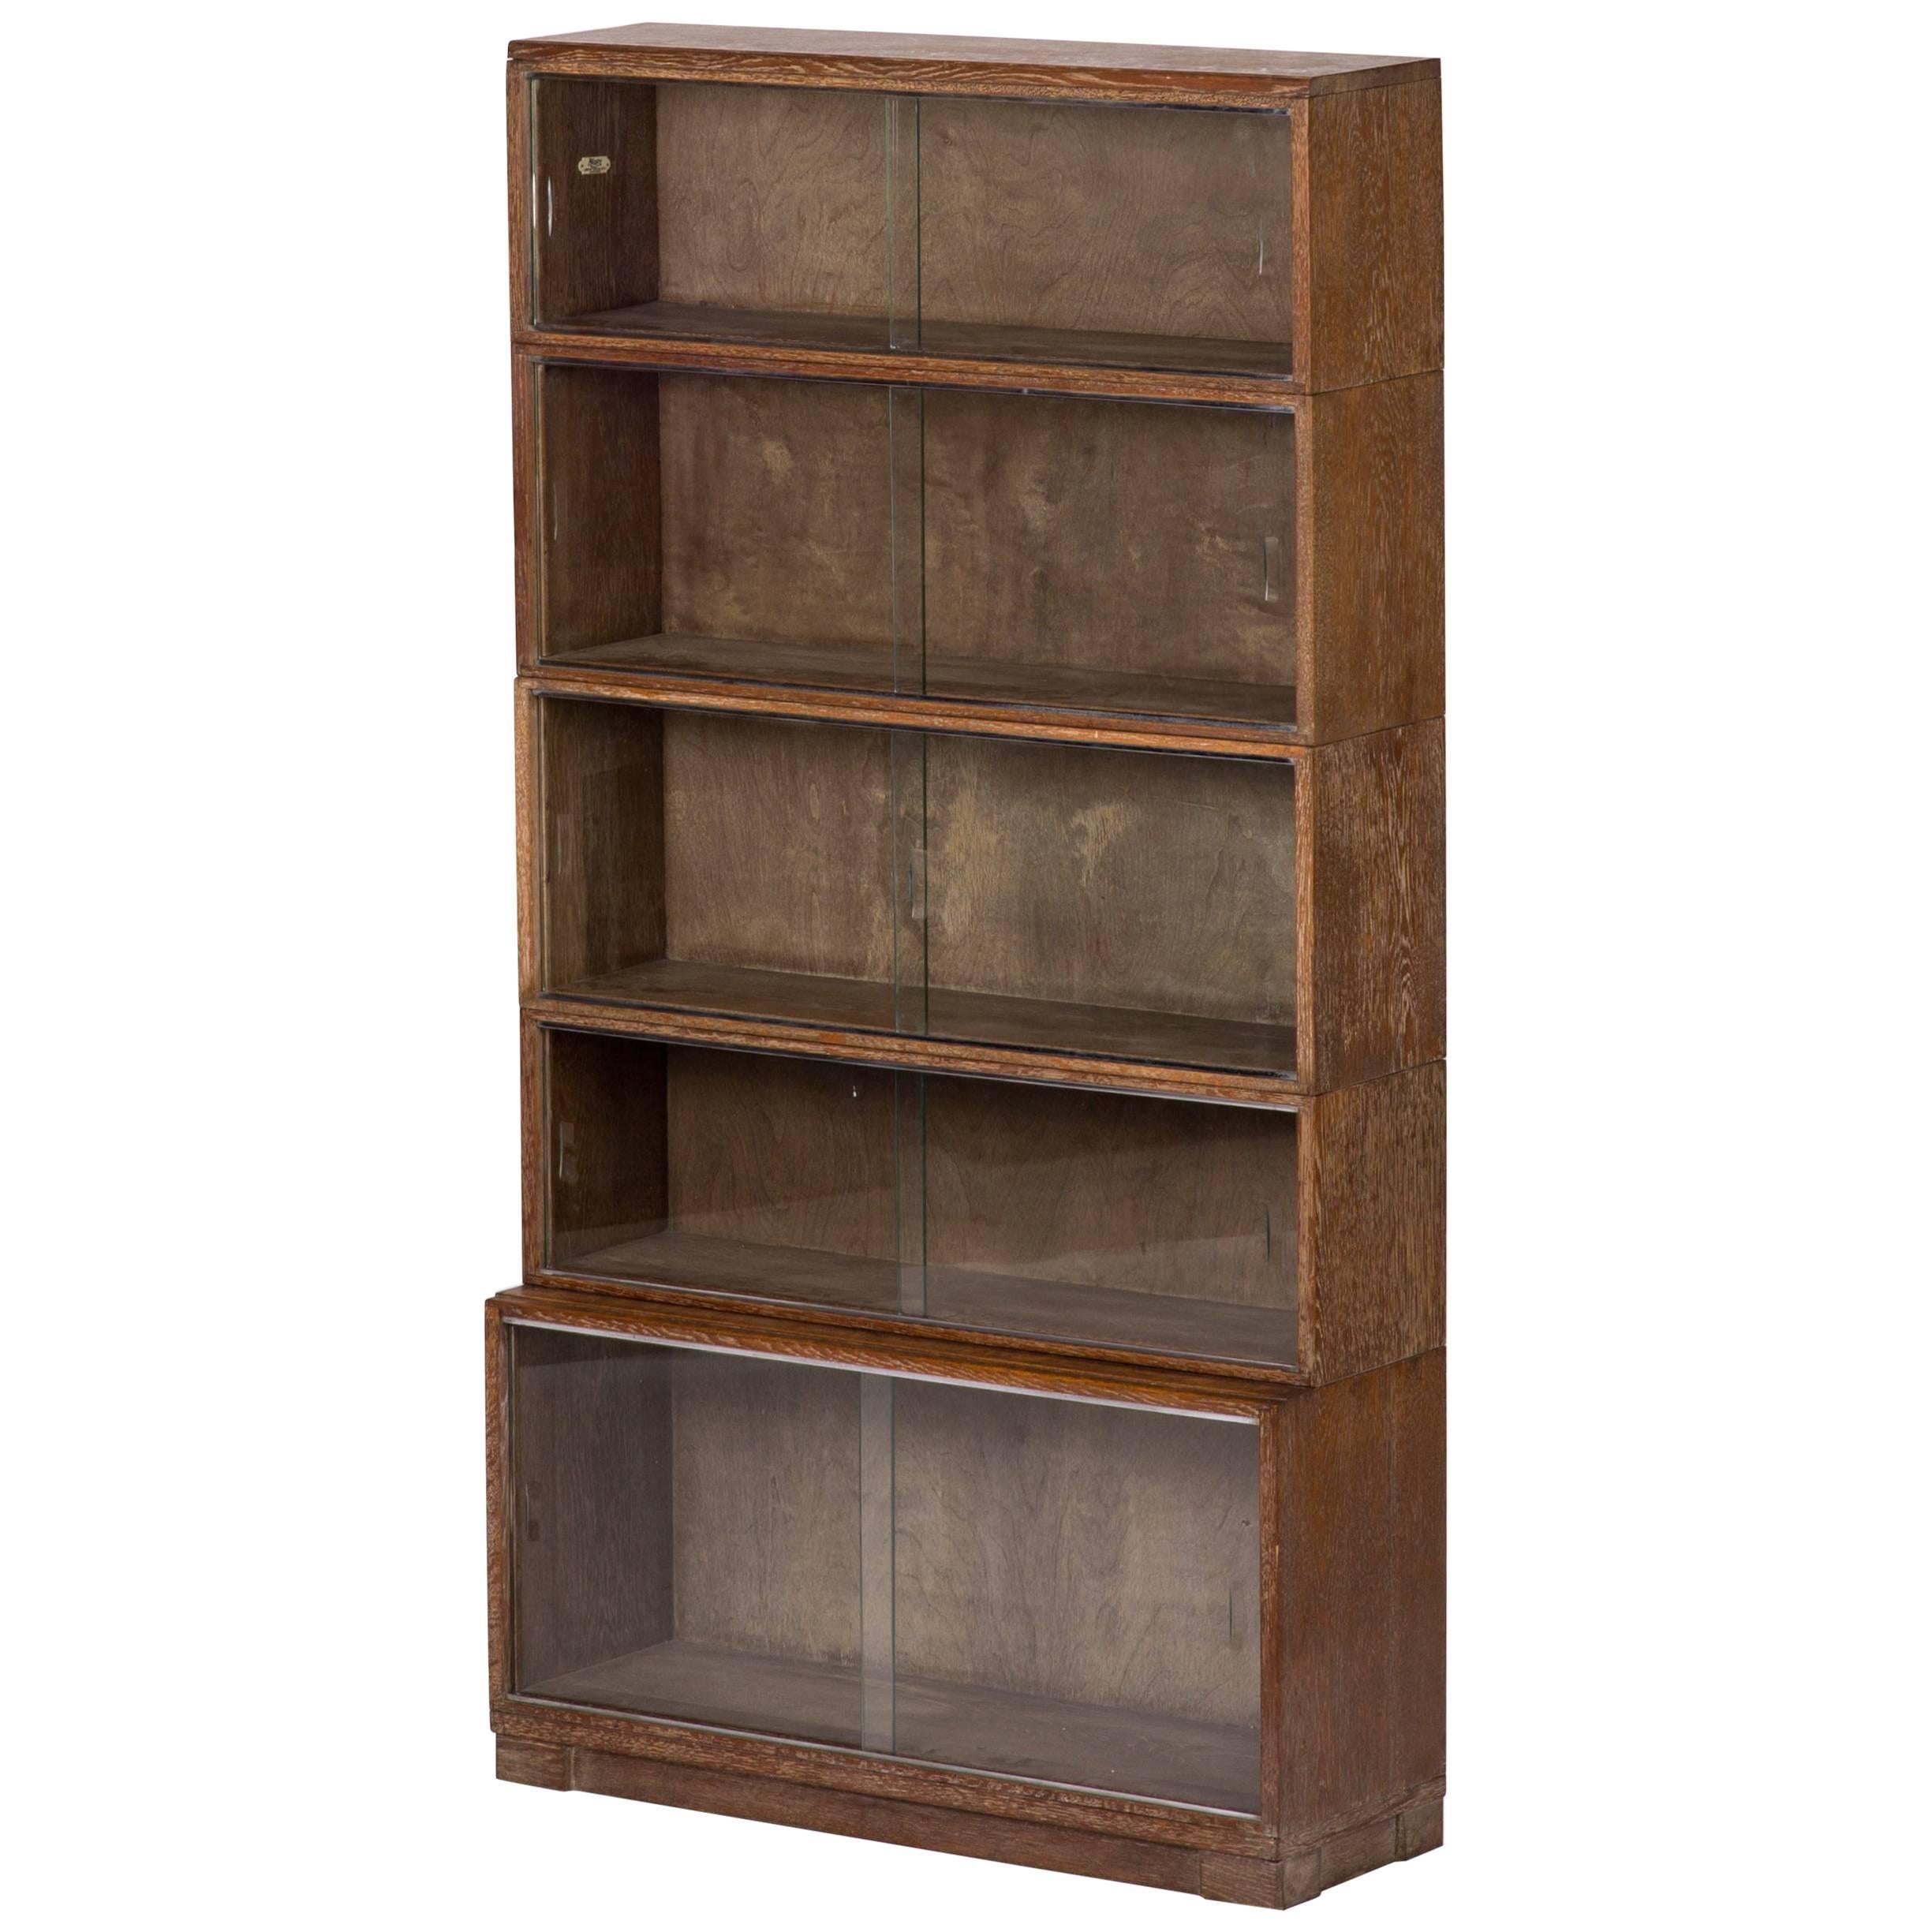 1930s Bookcase with Sliding Glass Doors from Oxford University